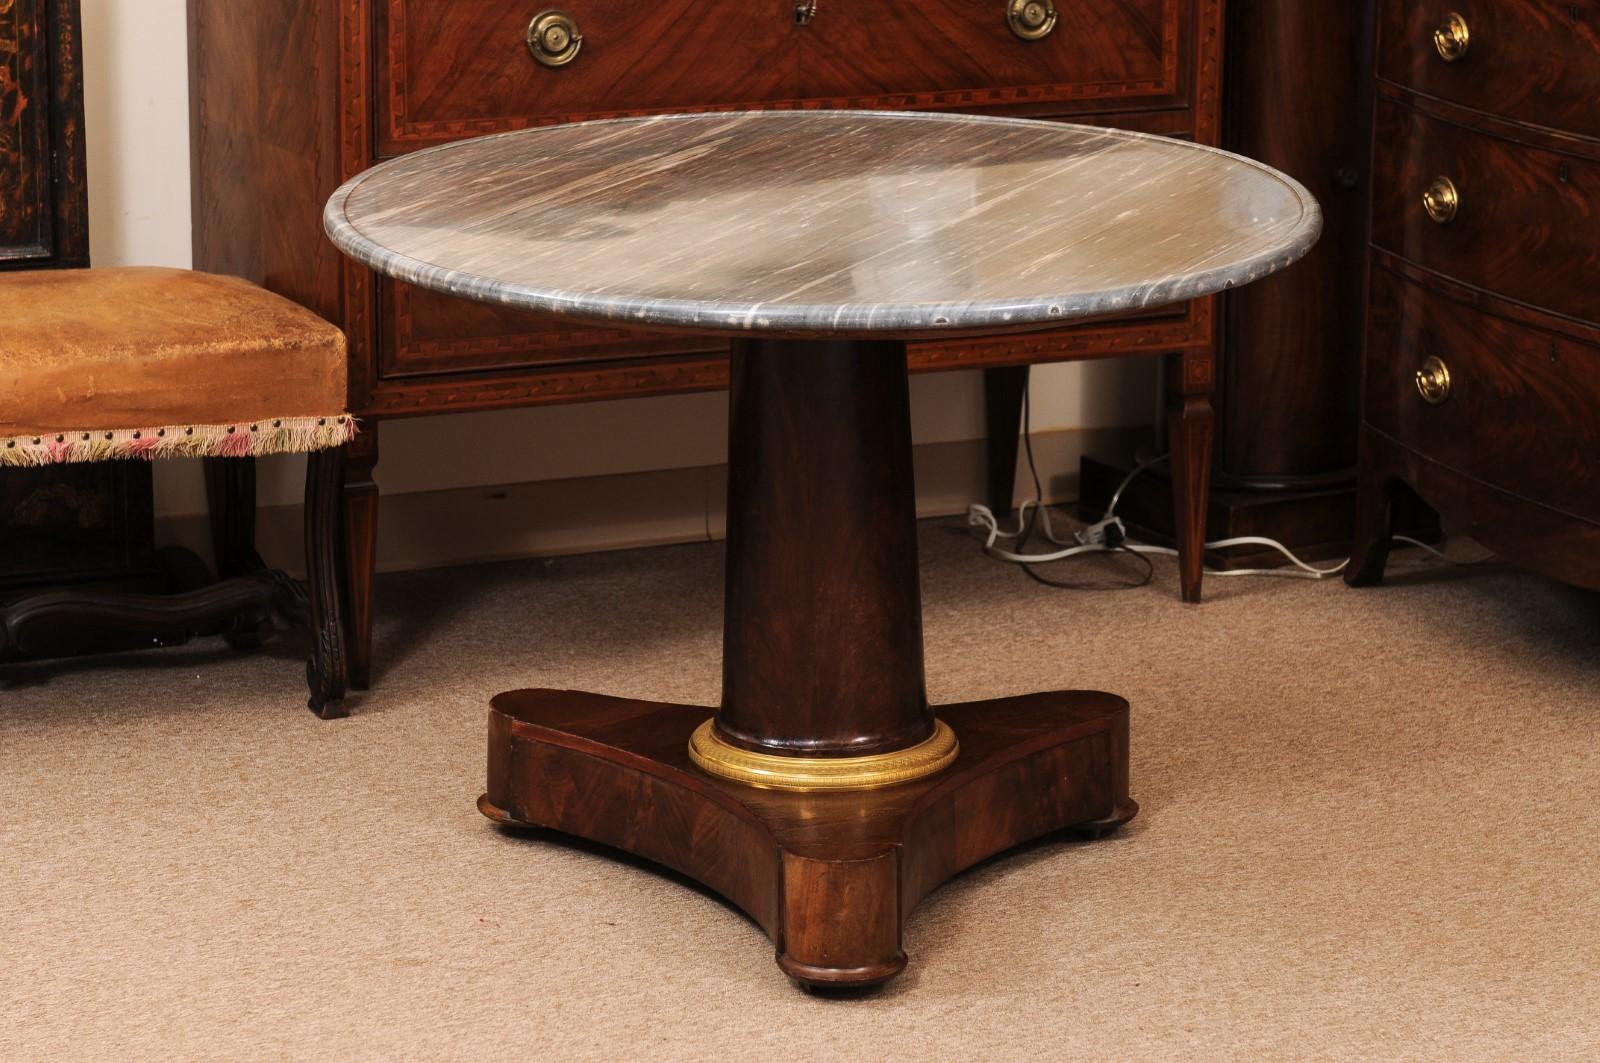  Early 19th C French Empire Walnut Center Table, Grey Marble Top & Ormolu Detail For Sale 5